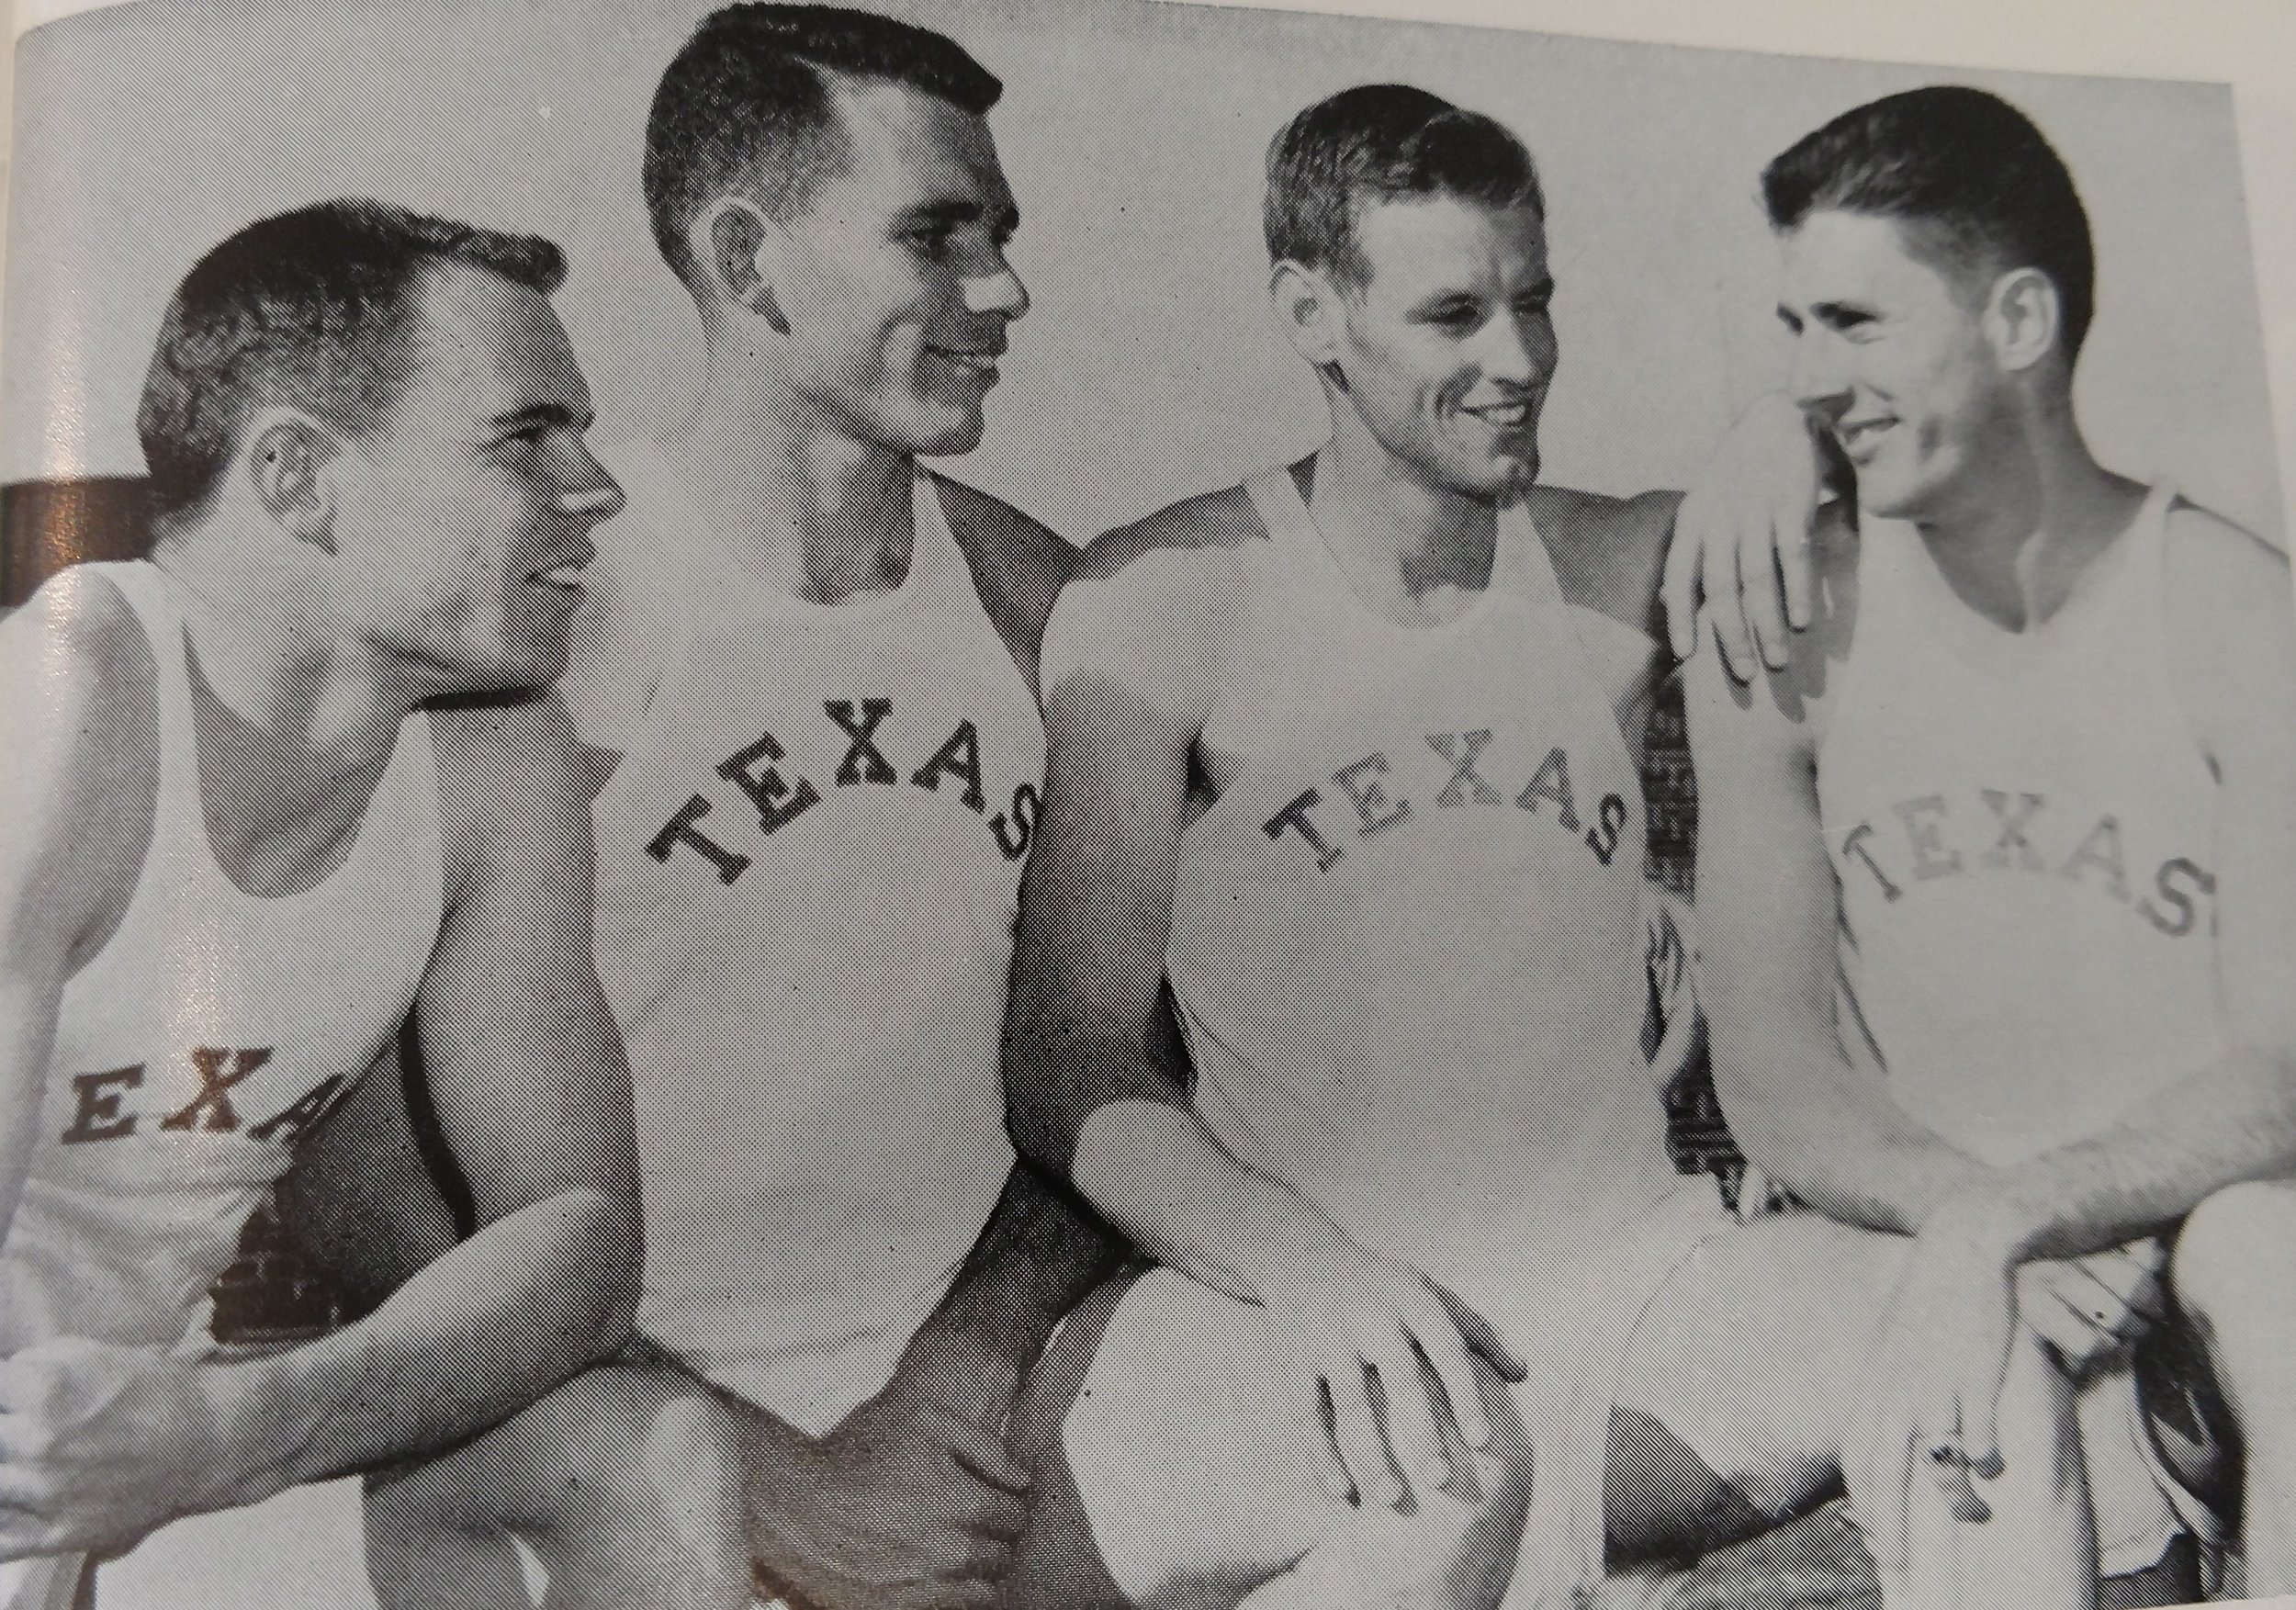 Track Wilson, Southern, Gainey, Whilden World record in 440 880 relays 1957 (18).jpg